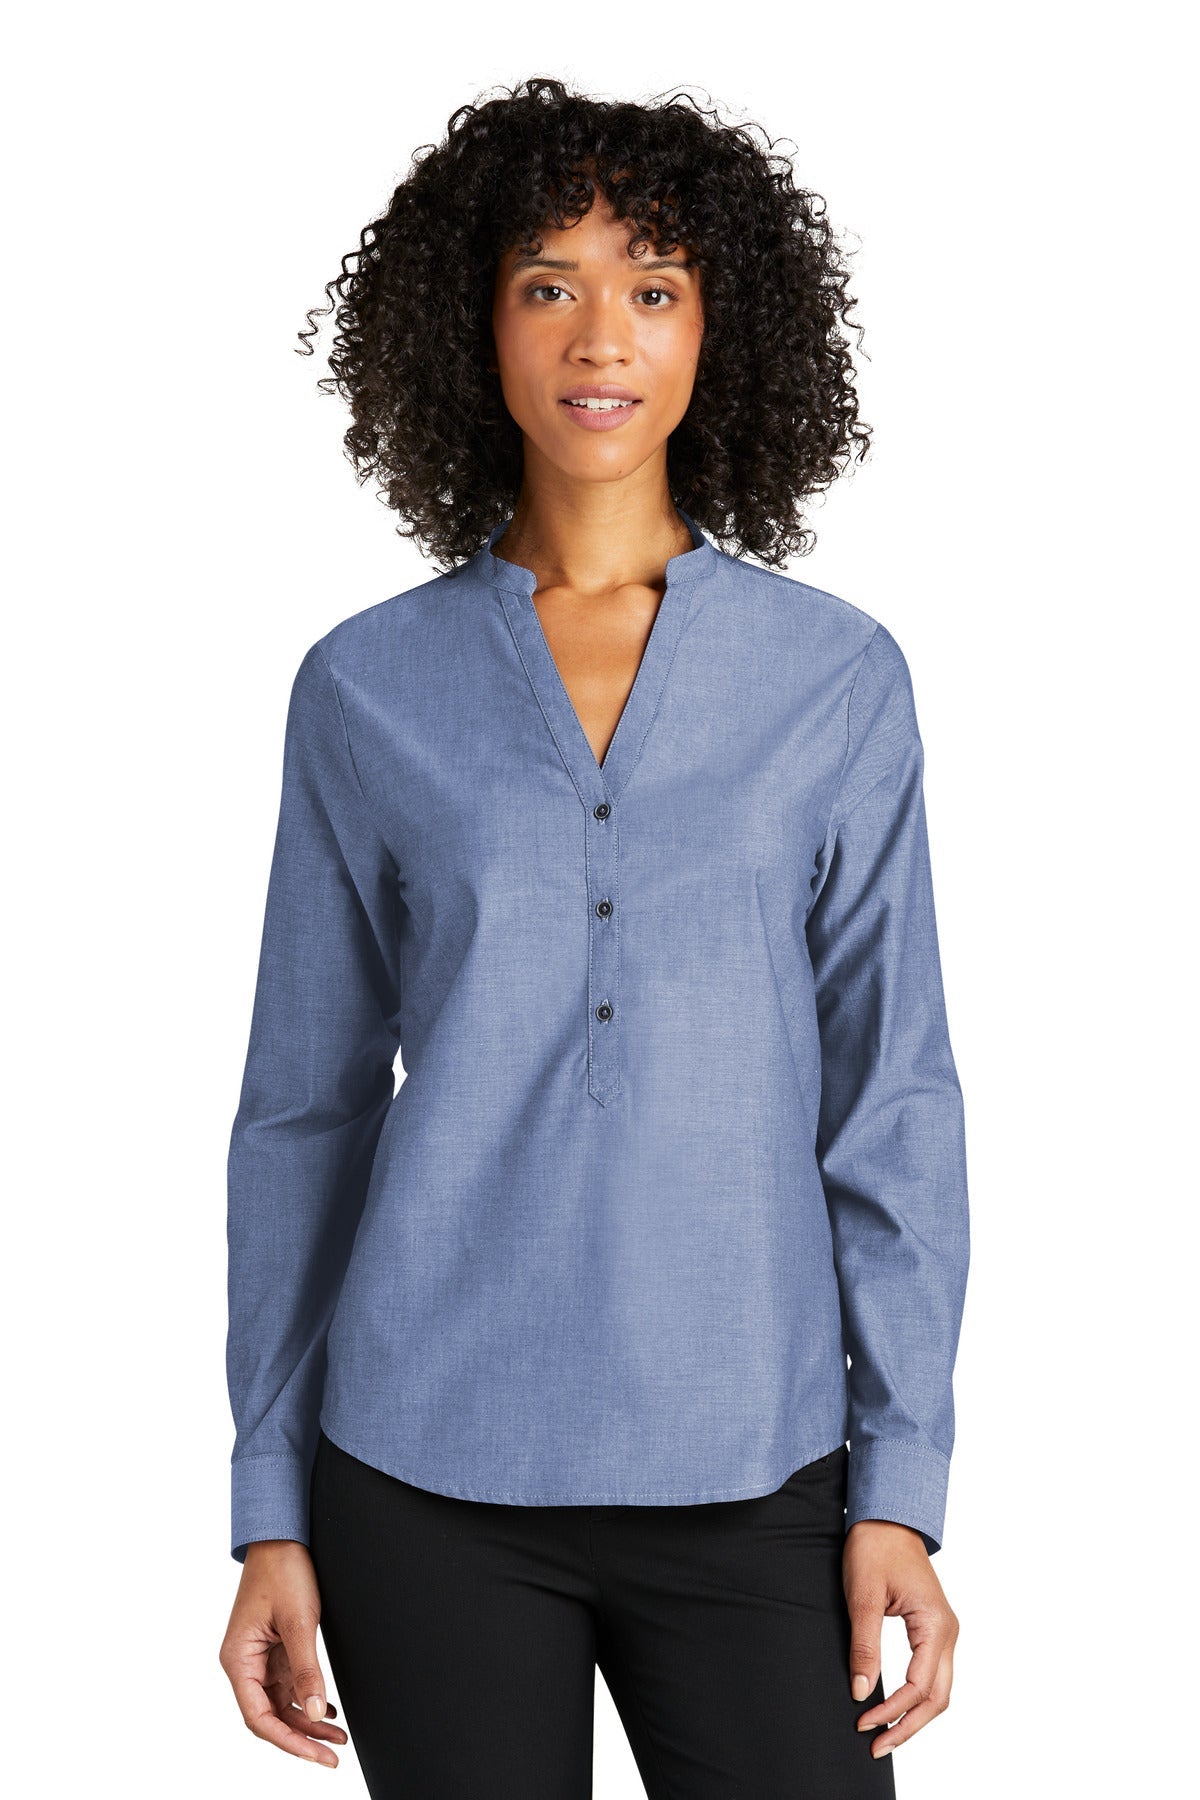 Port Authority® Ladies Long Sleeve Chambray Easy Care Shirt LW382 - DFW Impression